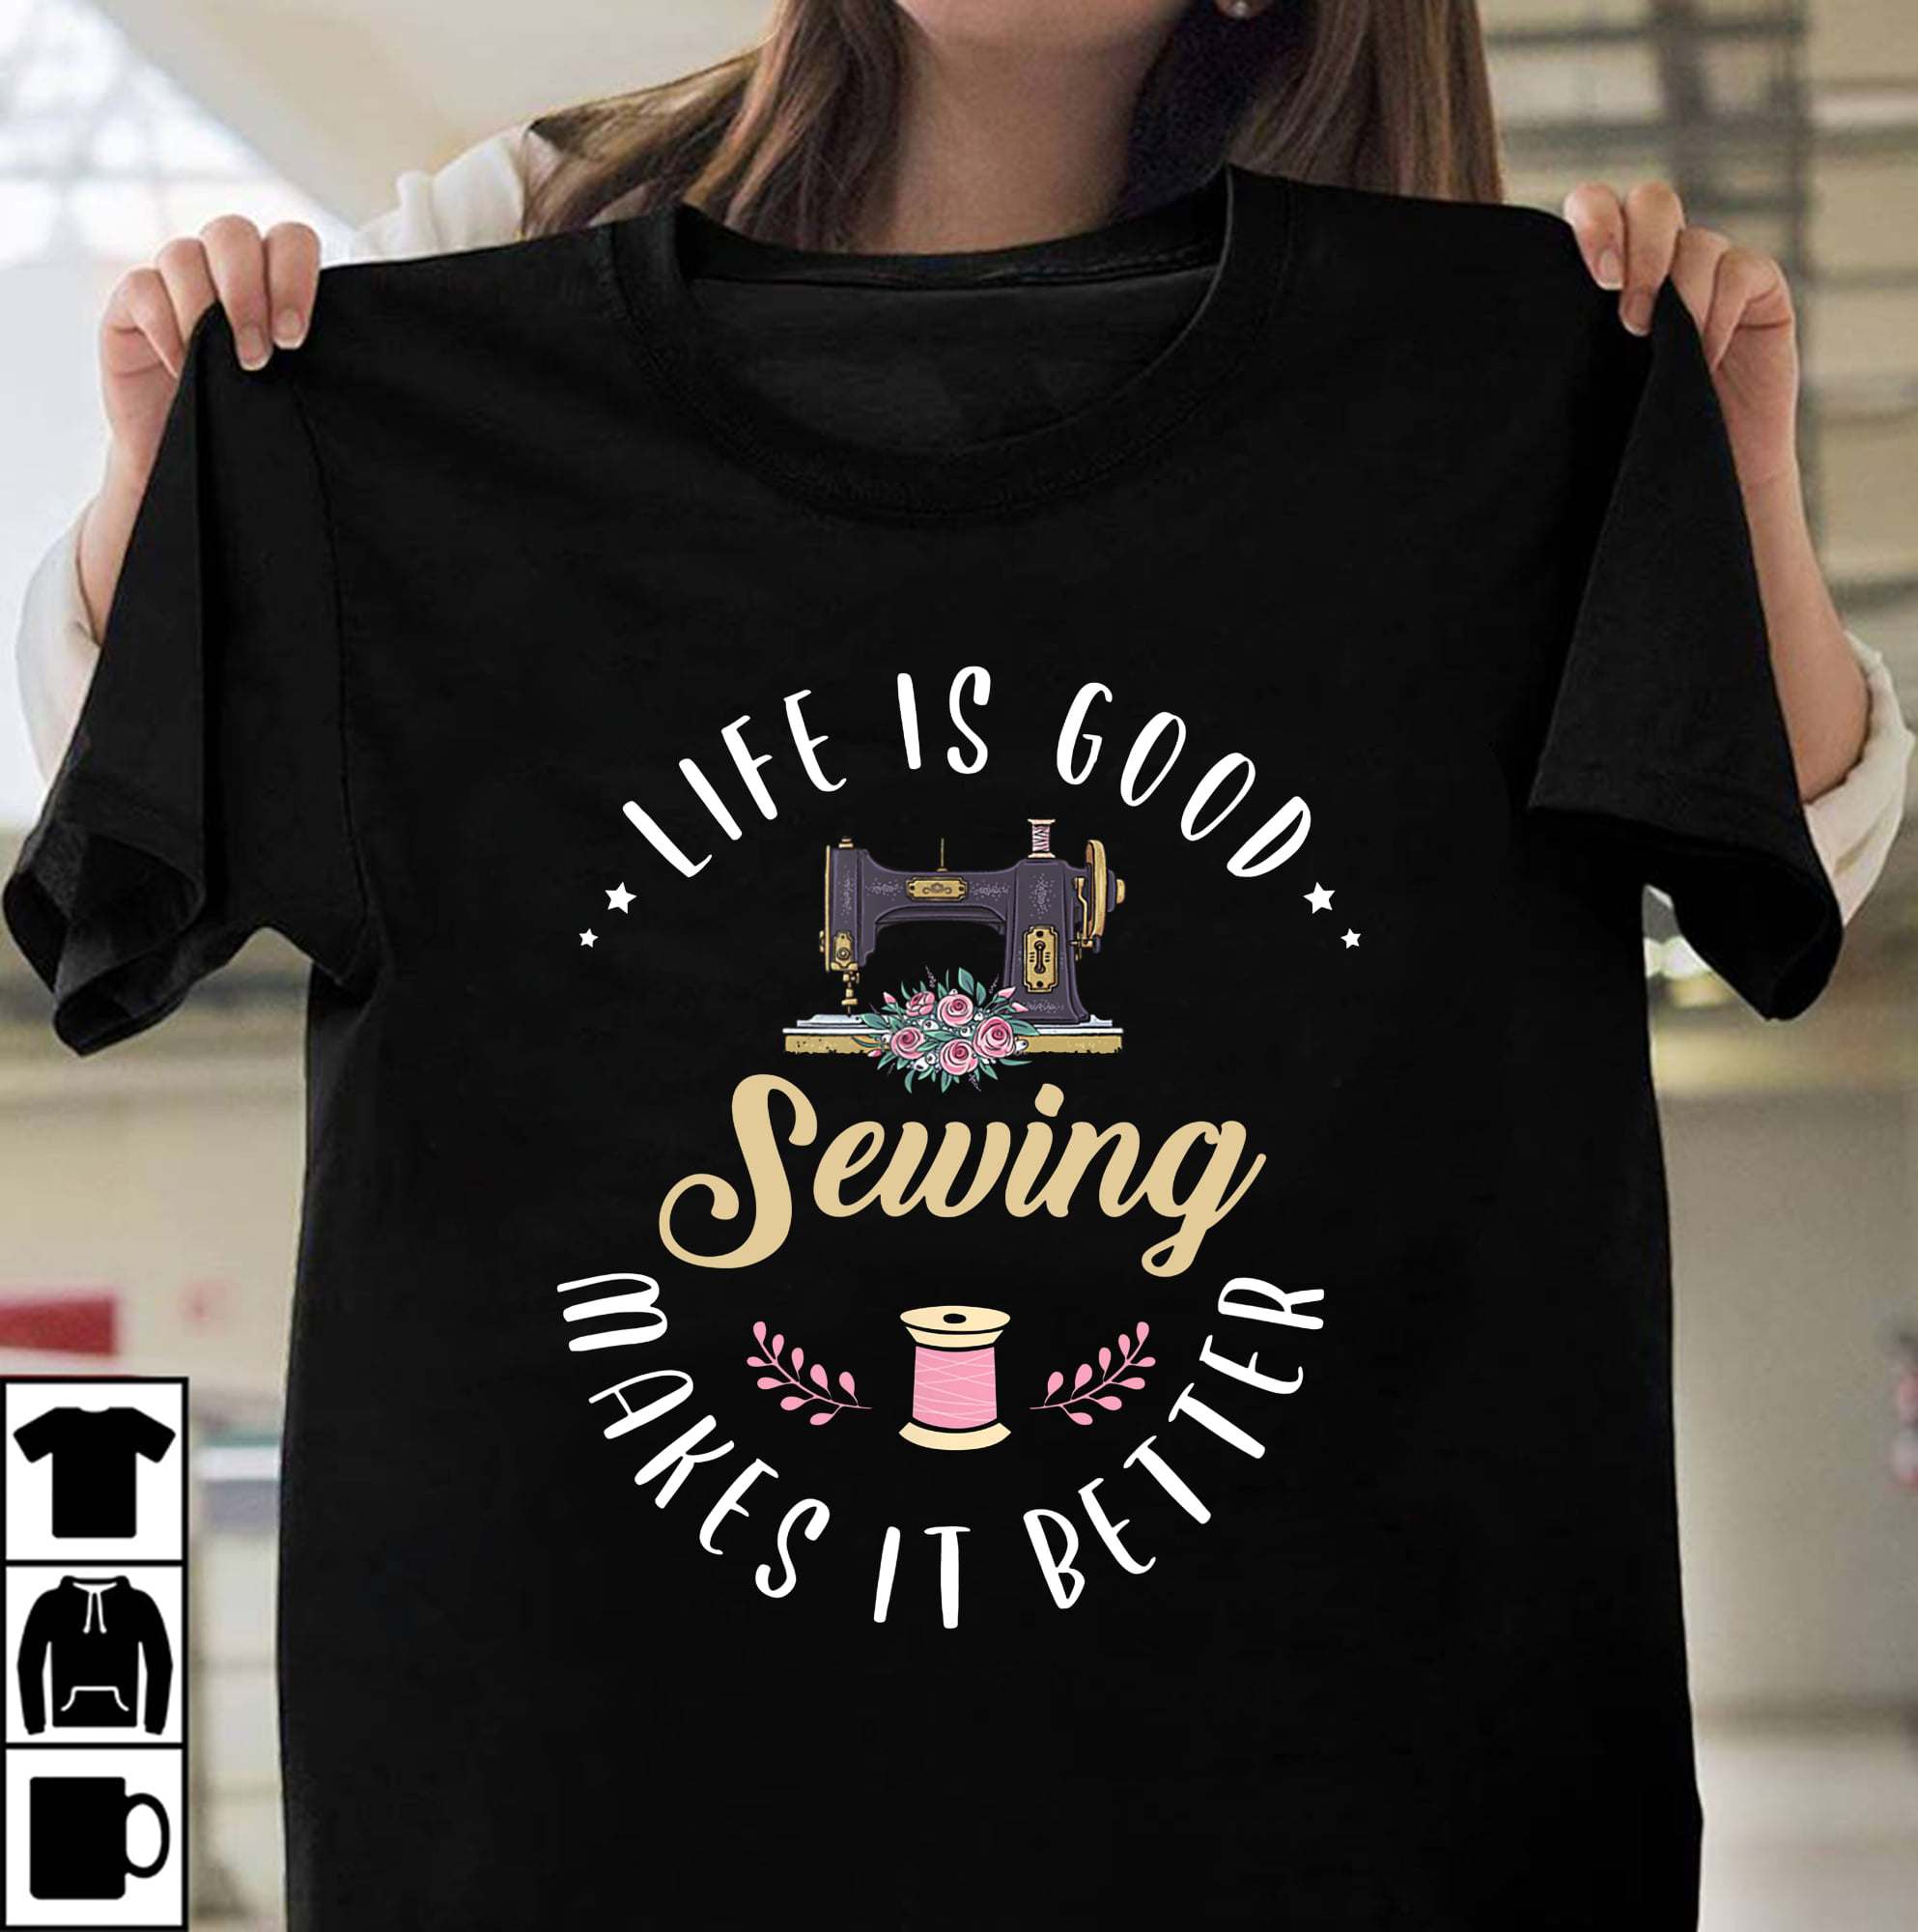 Life is good sewing makes it better - Sewing life, sewing machine